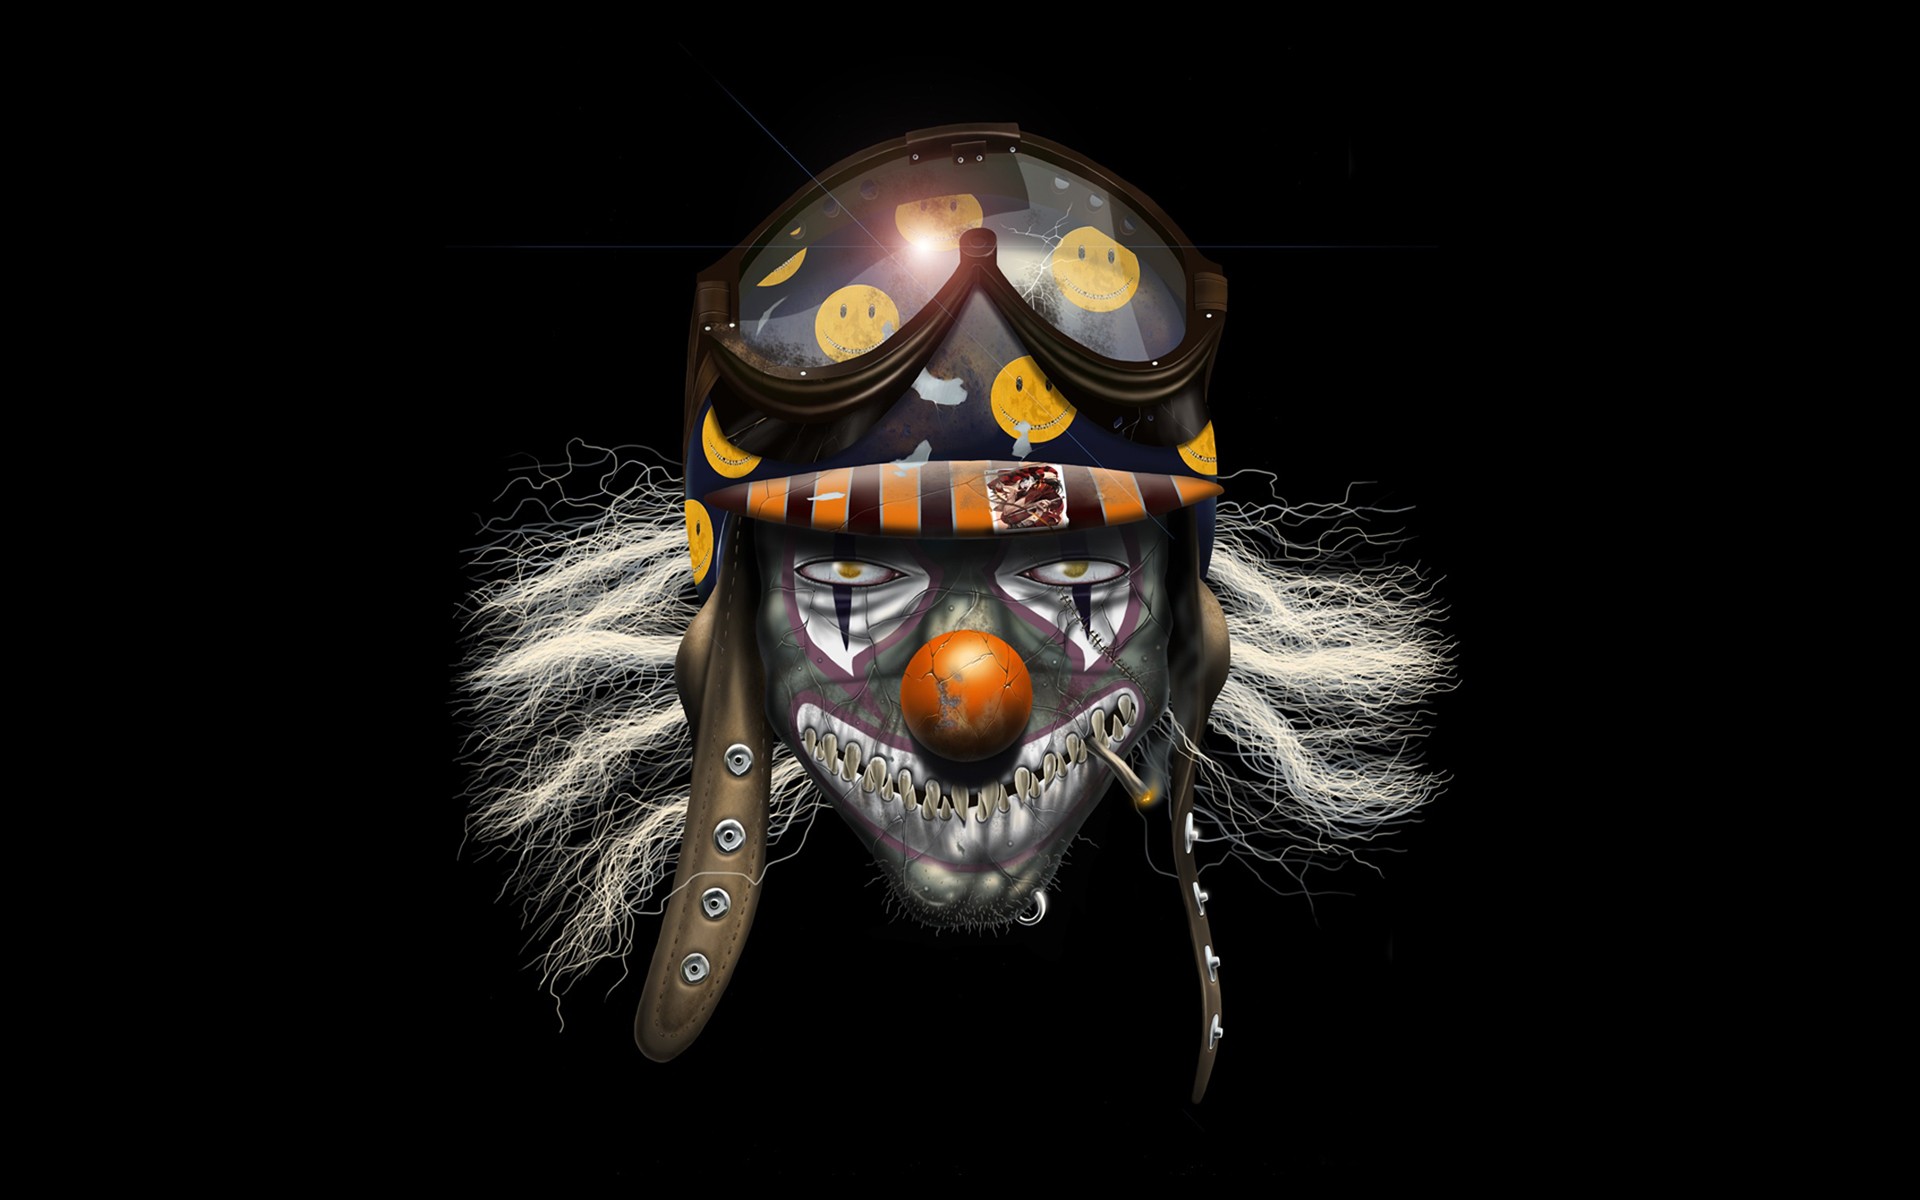 clown wallpaper hd,darkness,macro photography,photography,illustration,fictional character